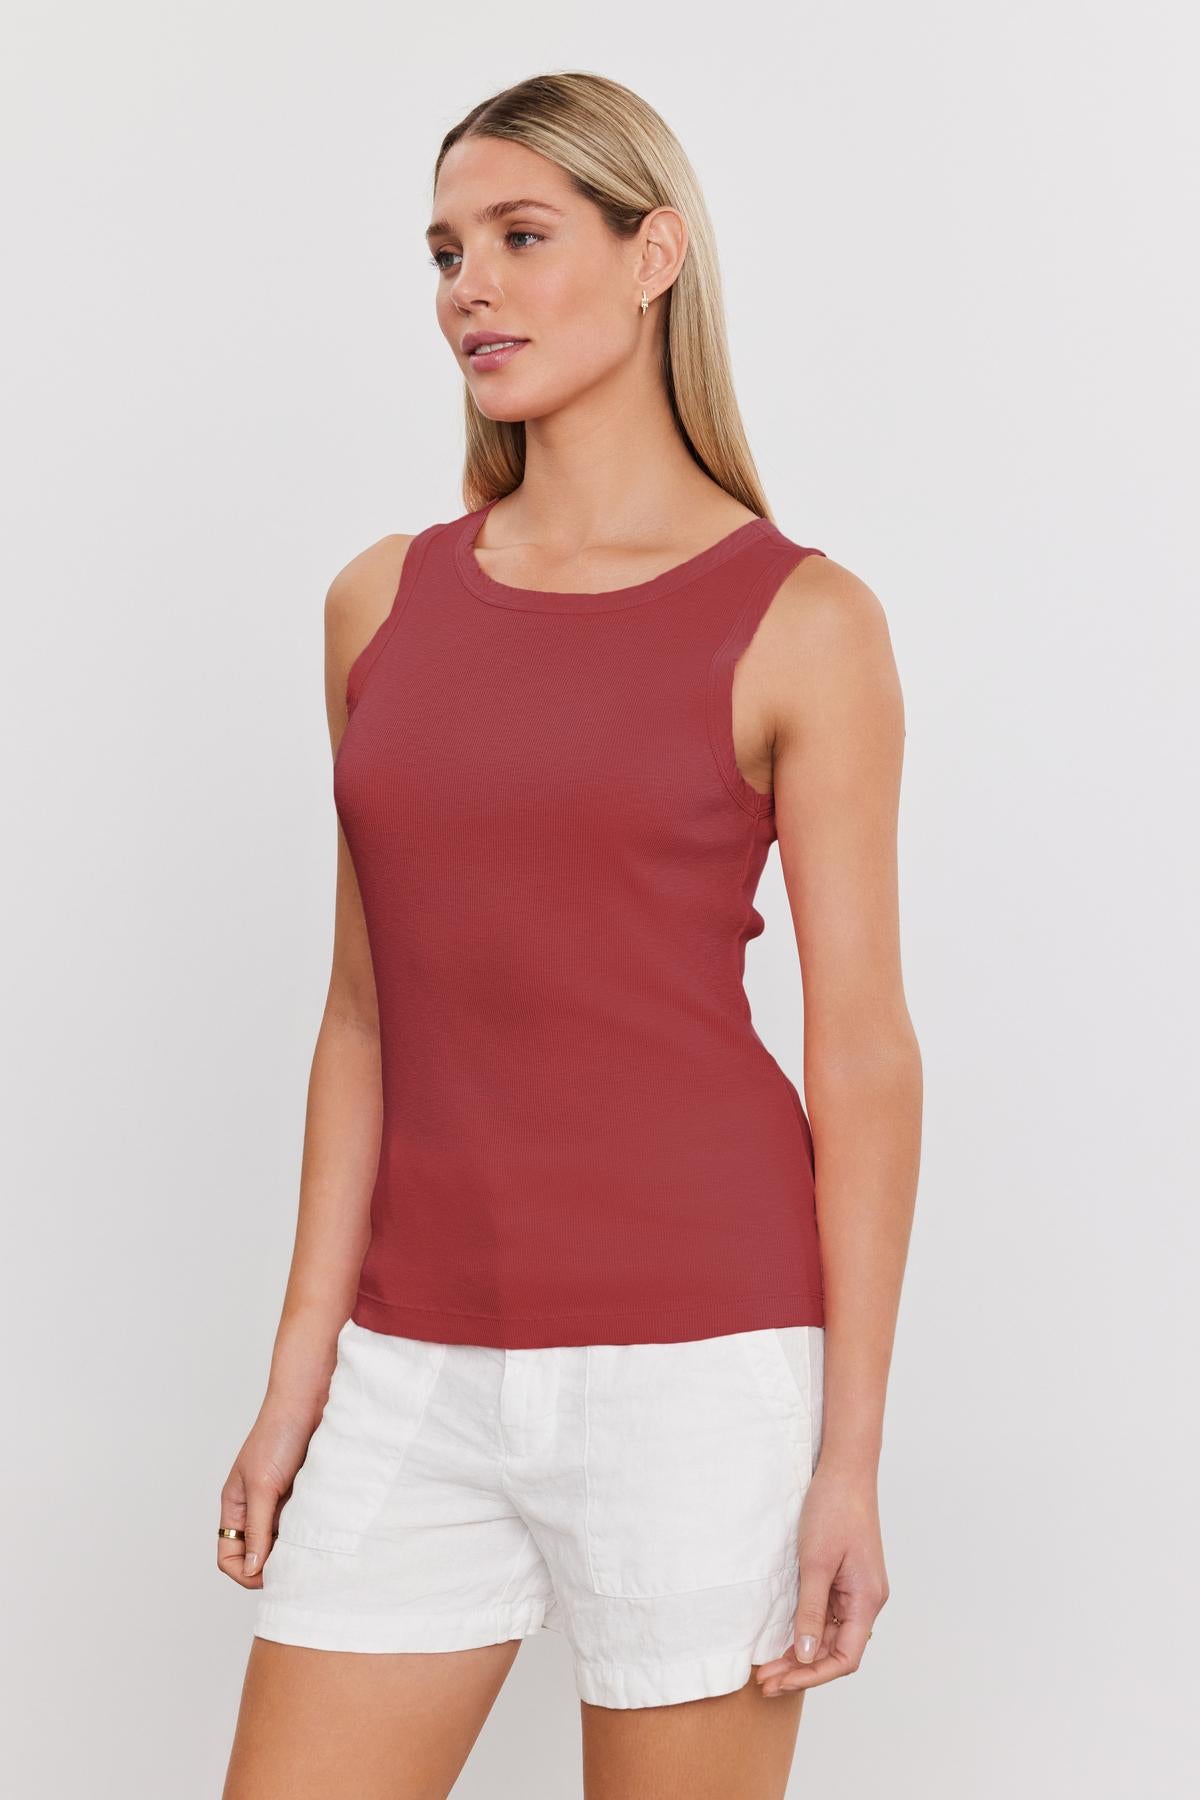 A person wearing a sleeveless red top and white shorts is standing against a plain background, showcasing the soft textured fabric of MAXIE RIBBED TANK TOP by Velvet by Graham & Spencer.-37241154568385